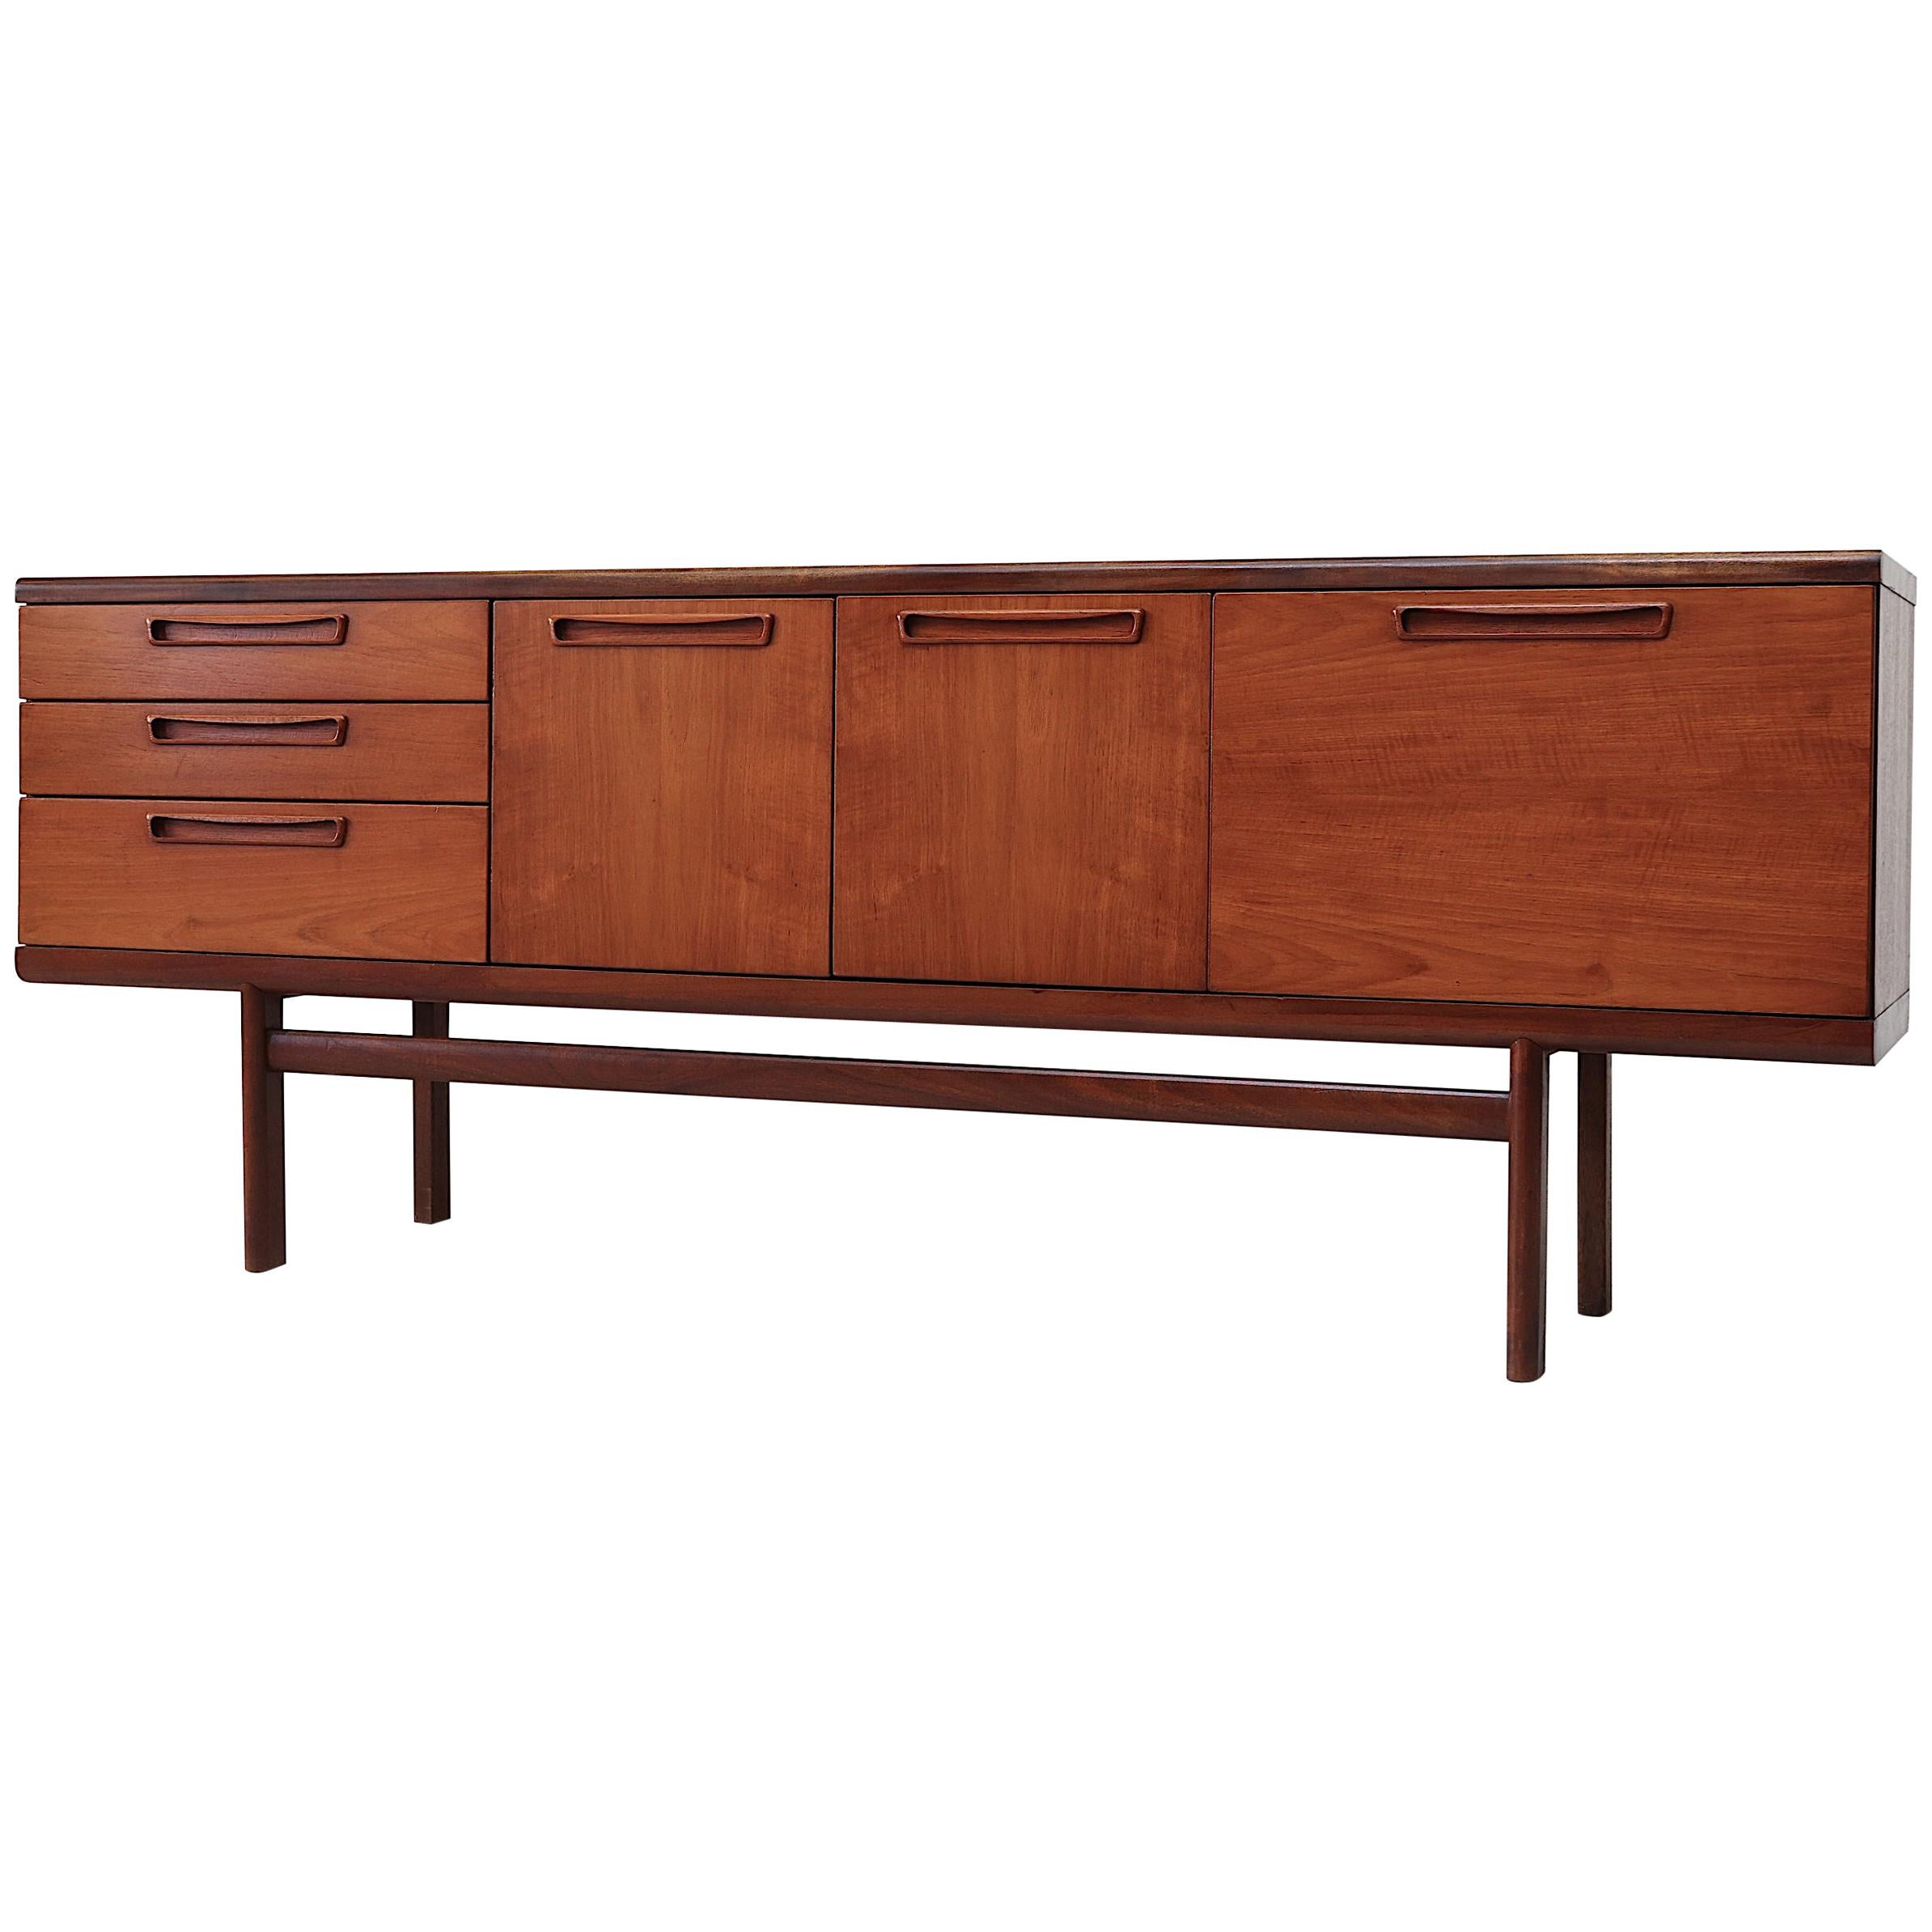 Midcentury Teak Credenza with Organically Carved Hand Pulls